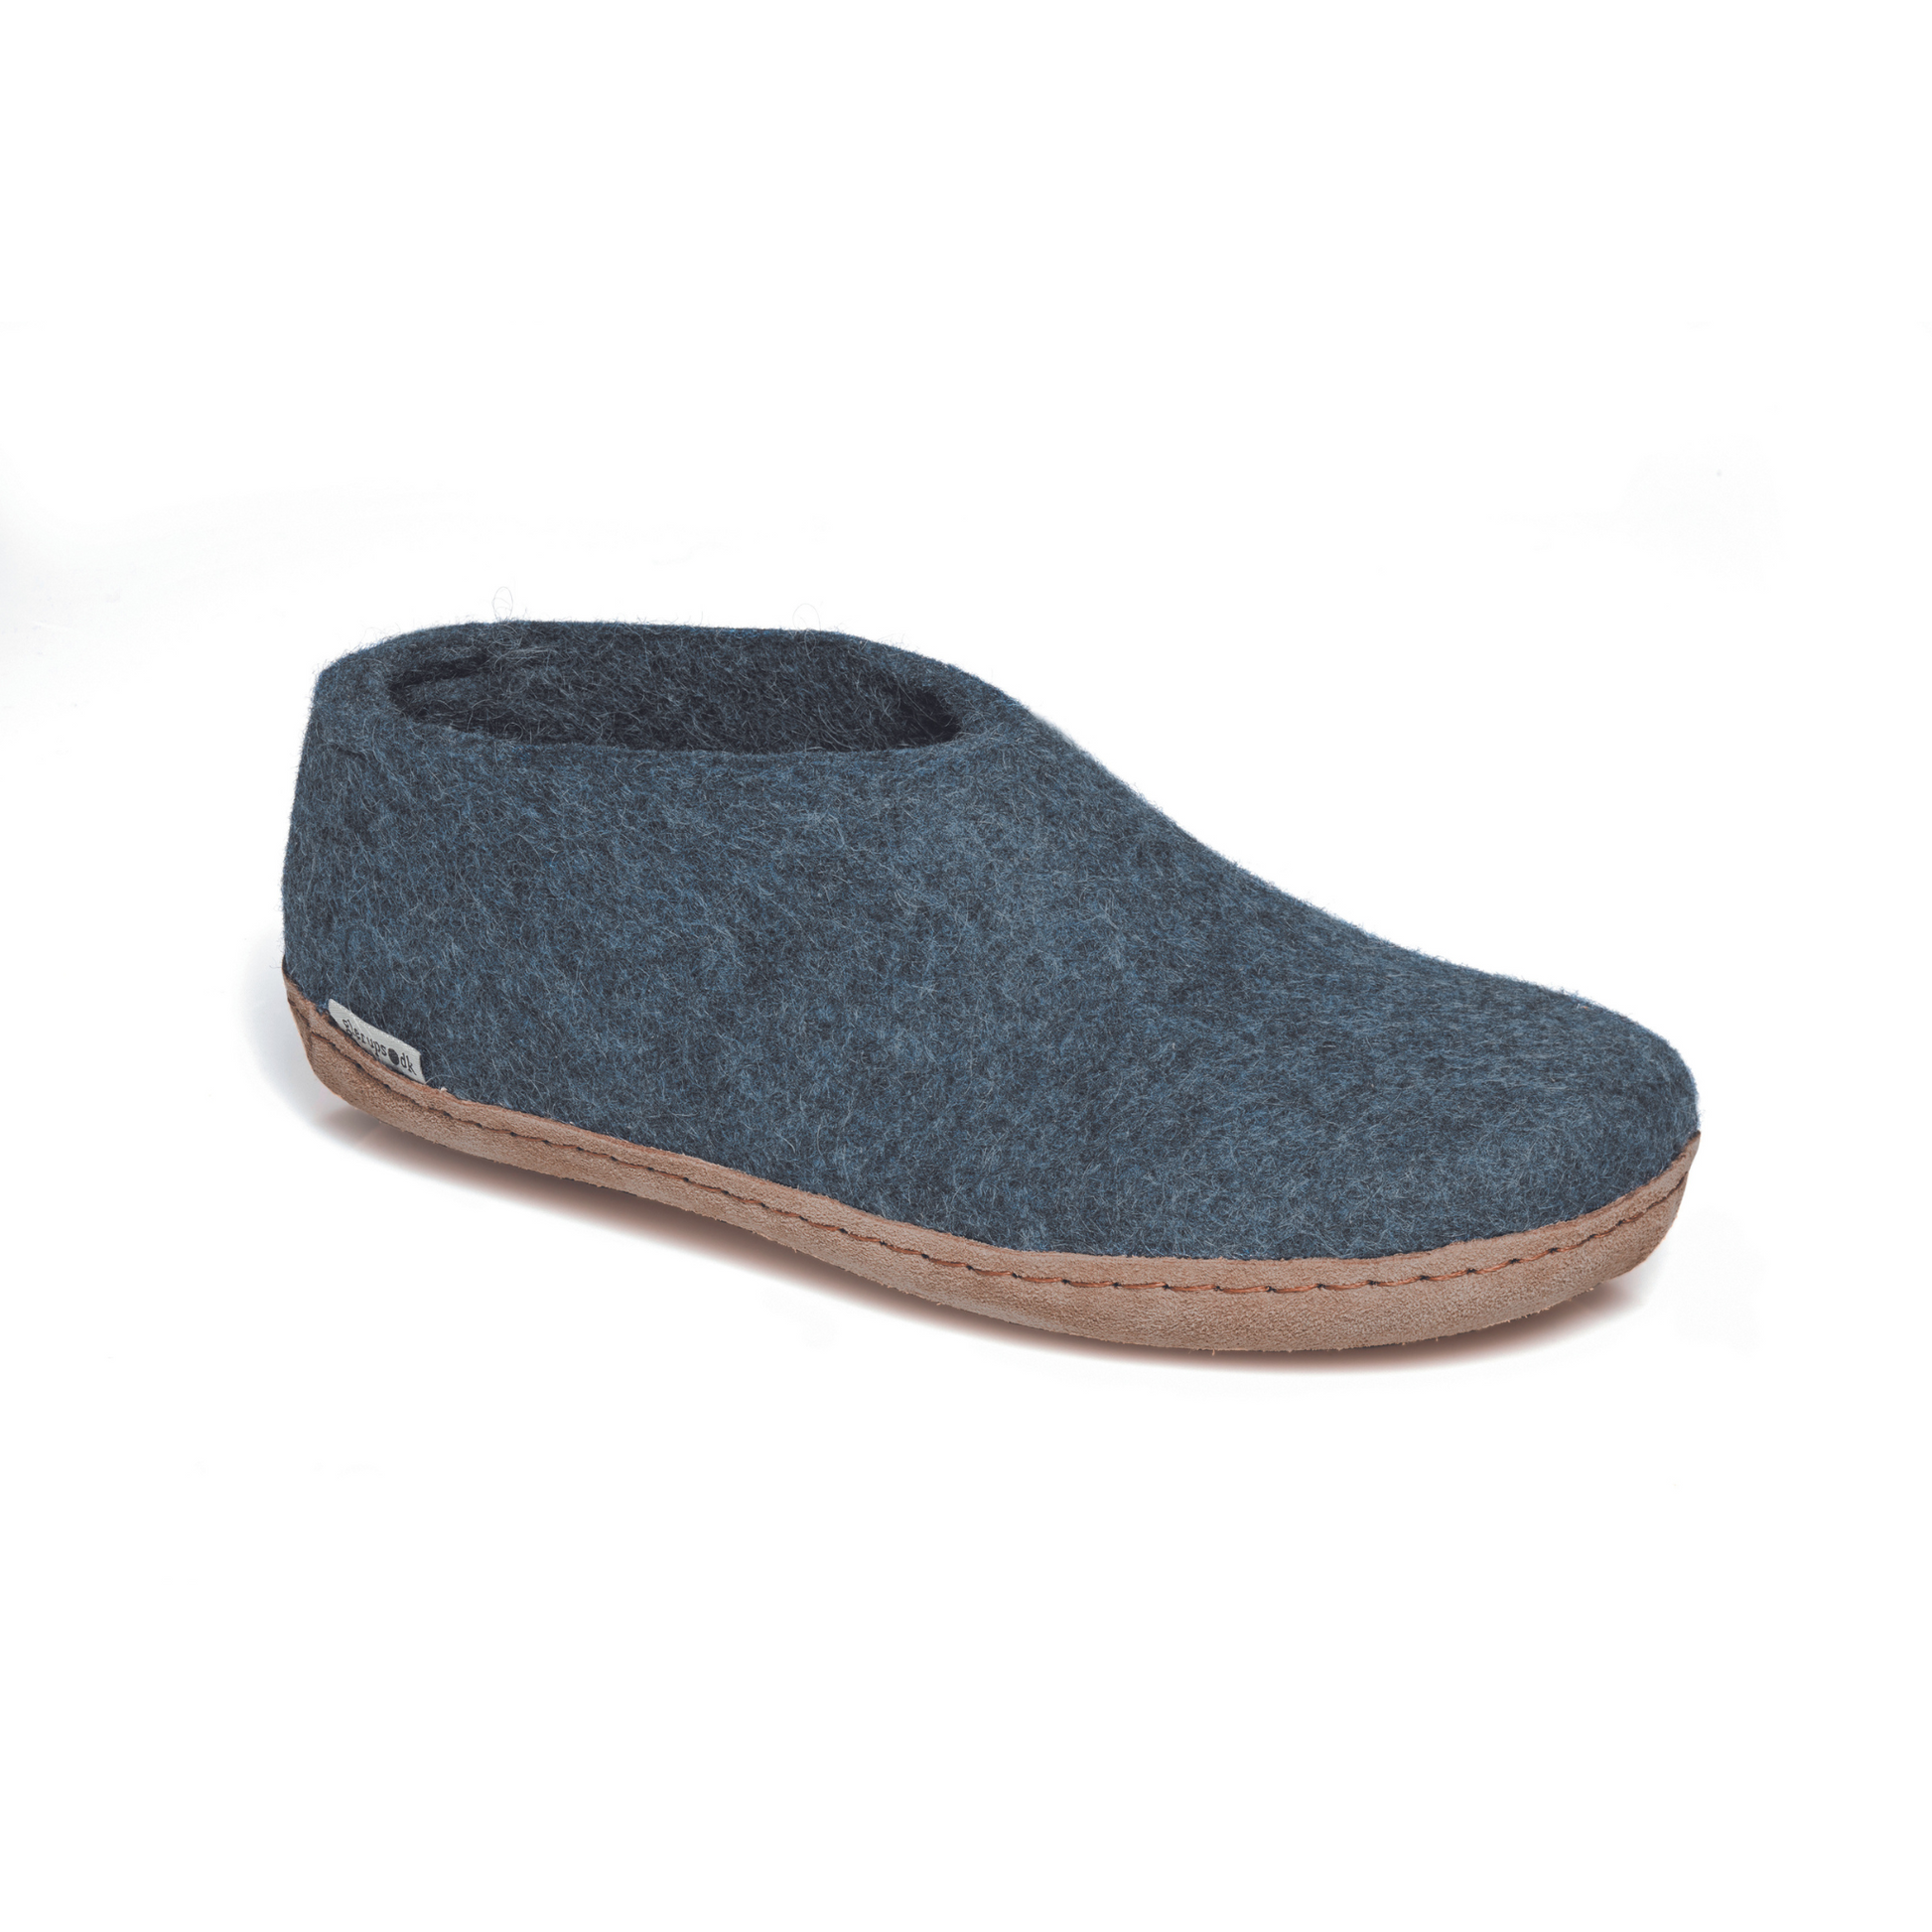 A felted dark demin-blue tall-back slipper pictured at a slight angle, showing part of the top front and side of the slipper. A tan leather sole lines the bottom of the shoe with a row of stitching.